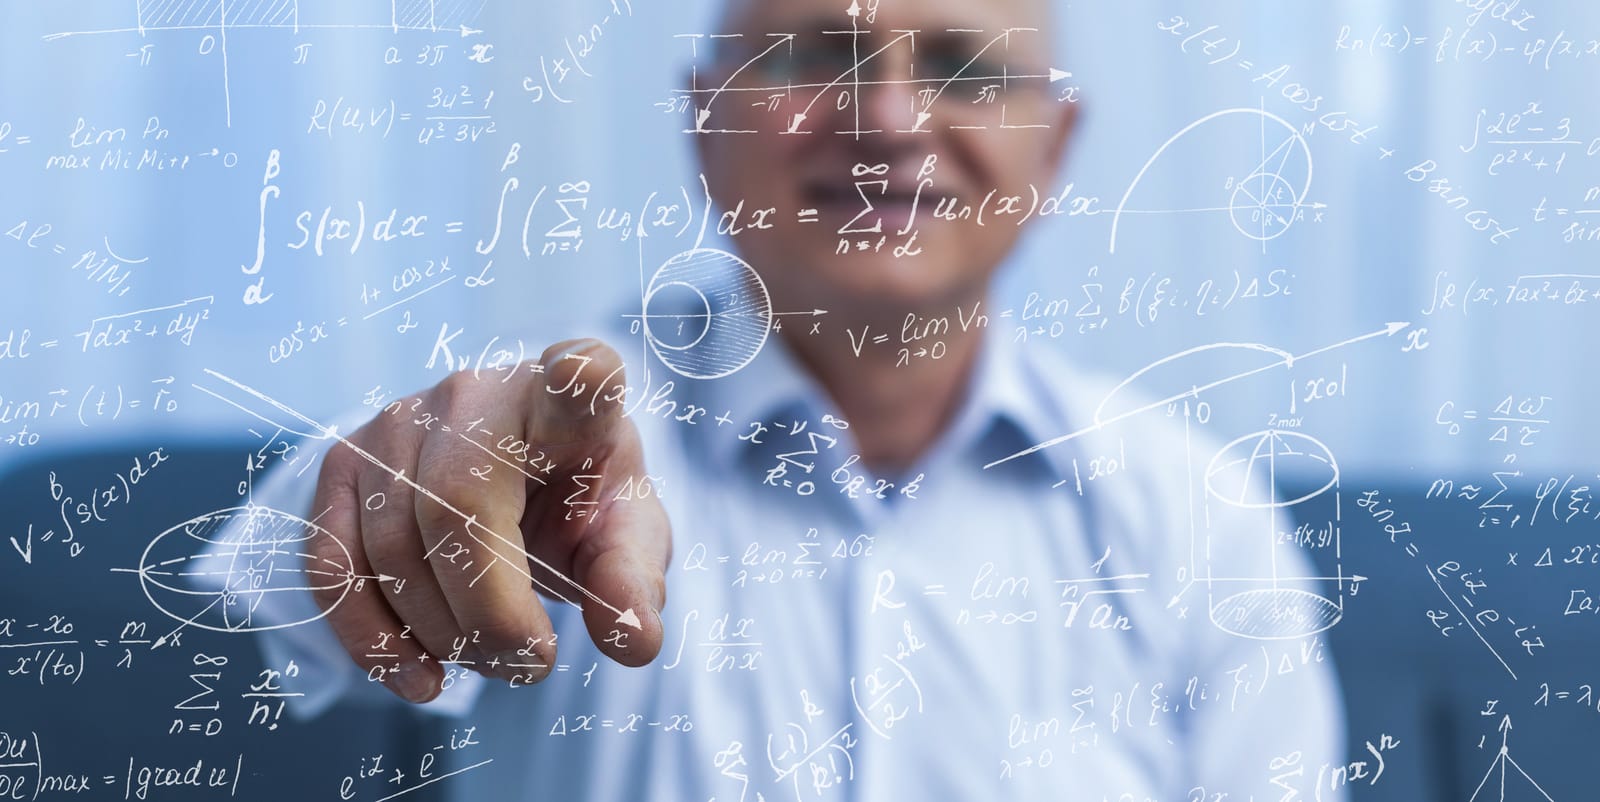 An image of a man pointing to mathematic formulas.